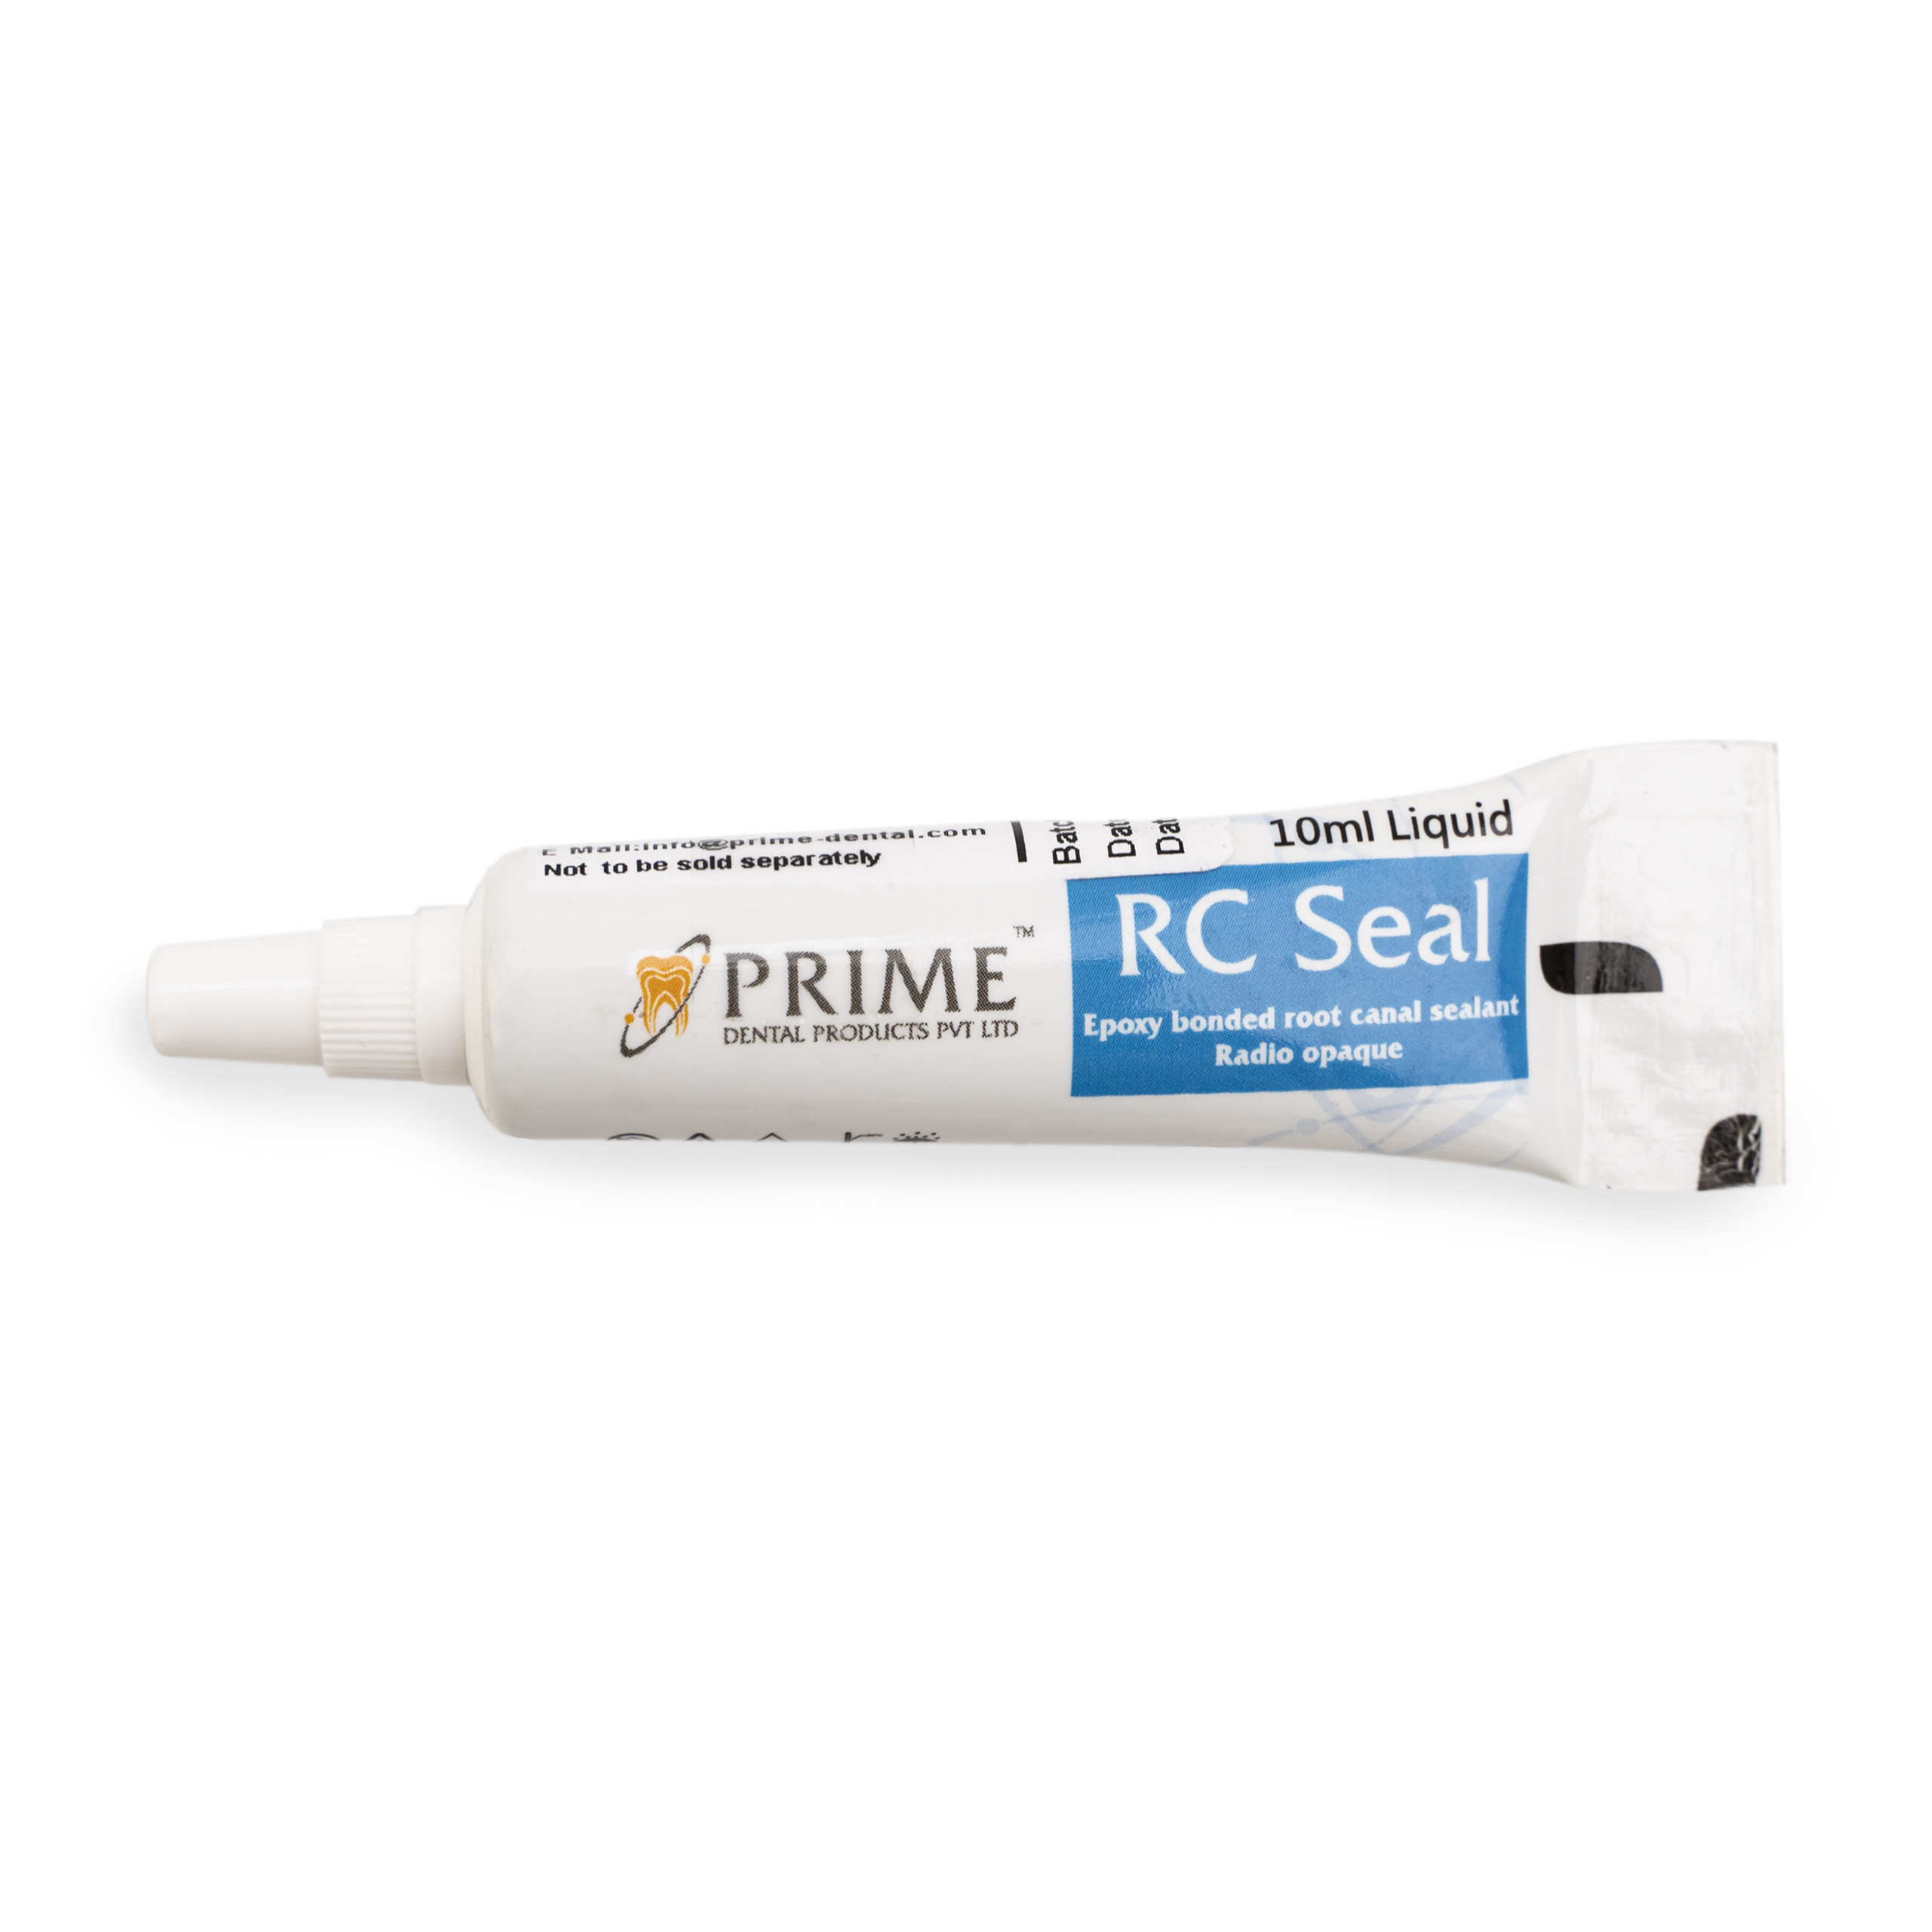 RC Seal Plus Epoxy Bonded Root Canal Sealant at Rs 1500/pack